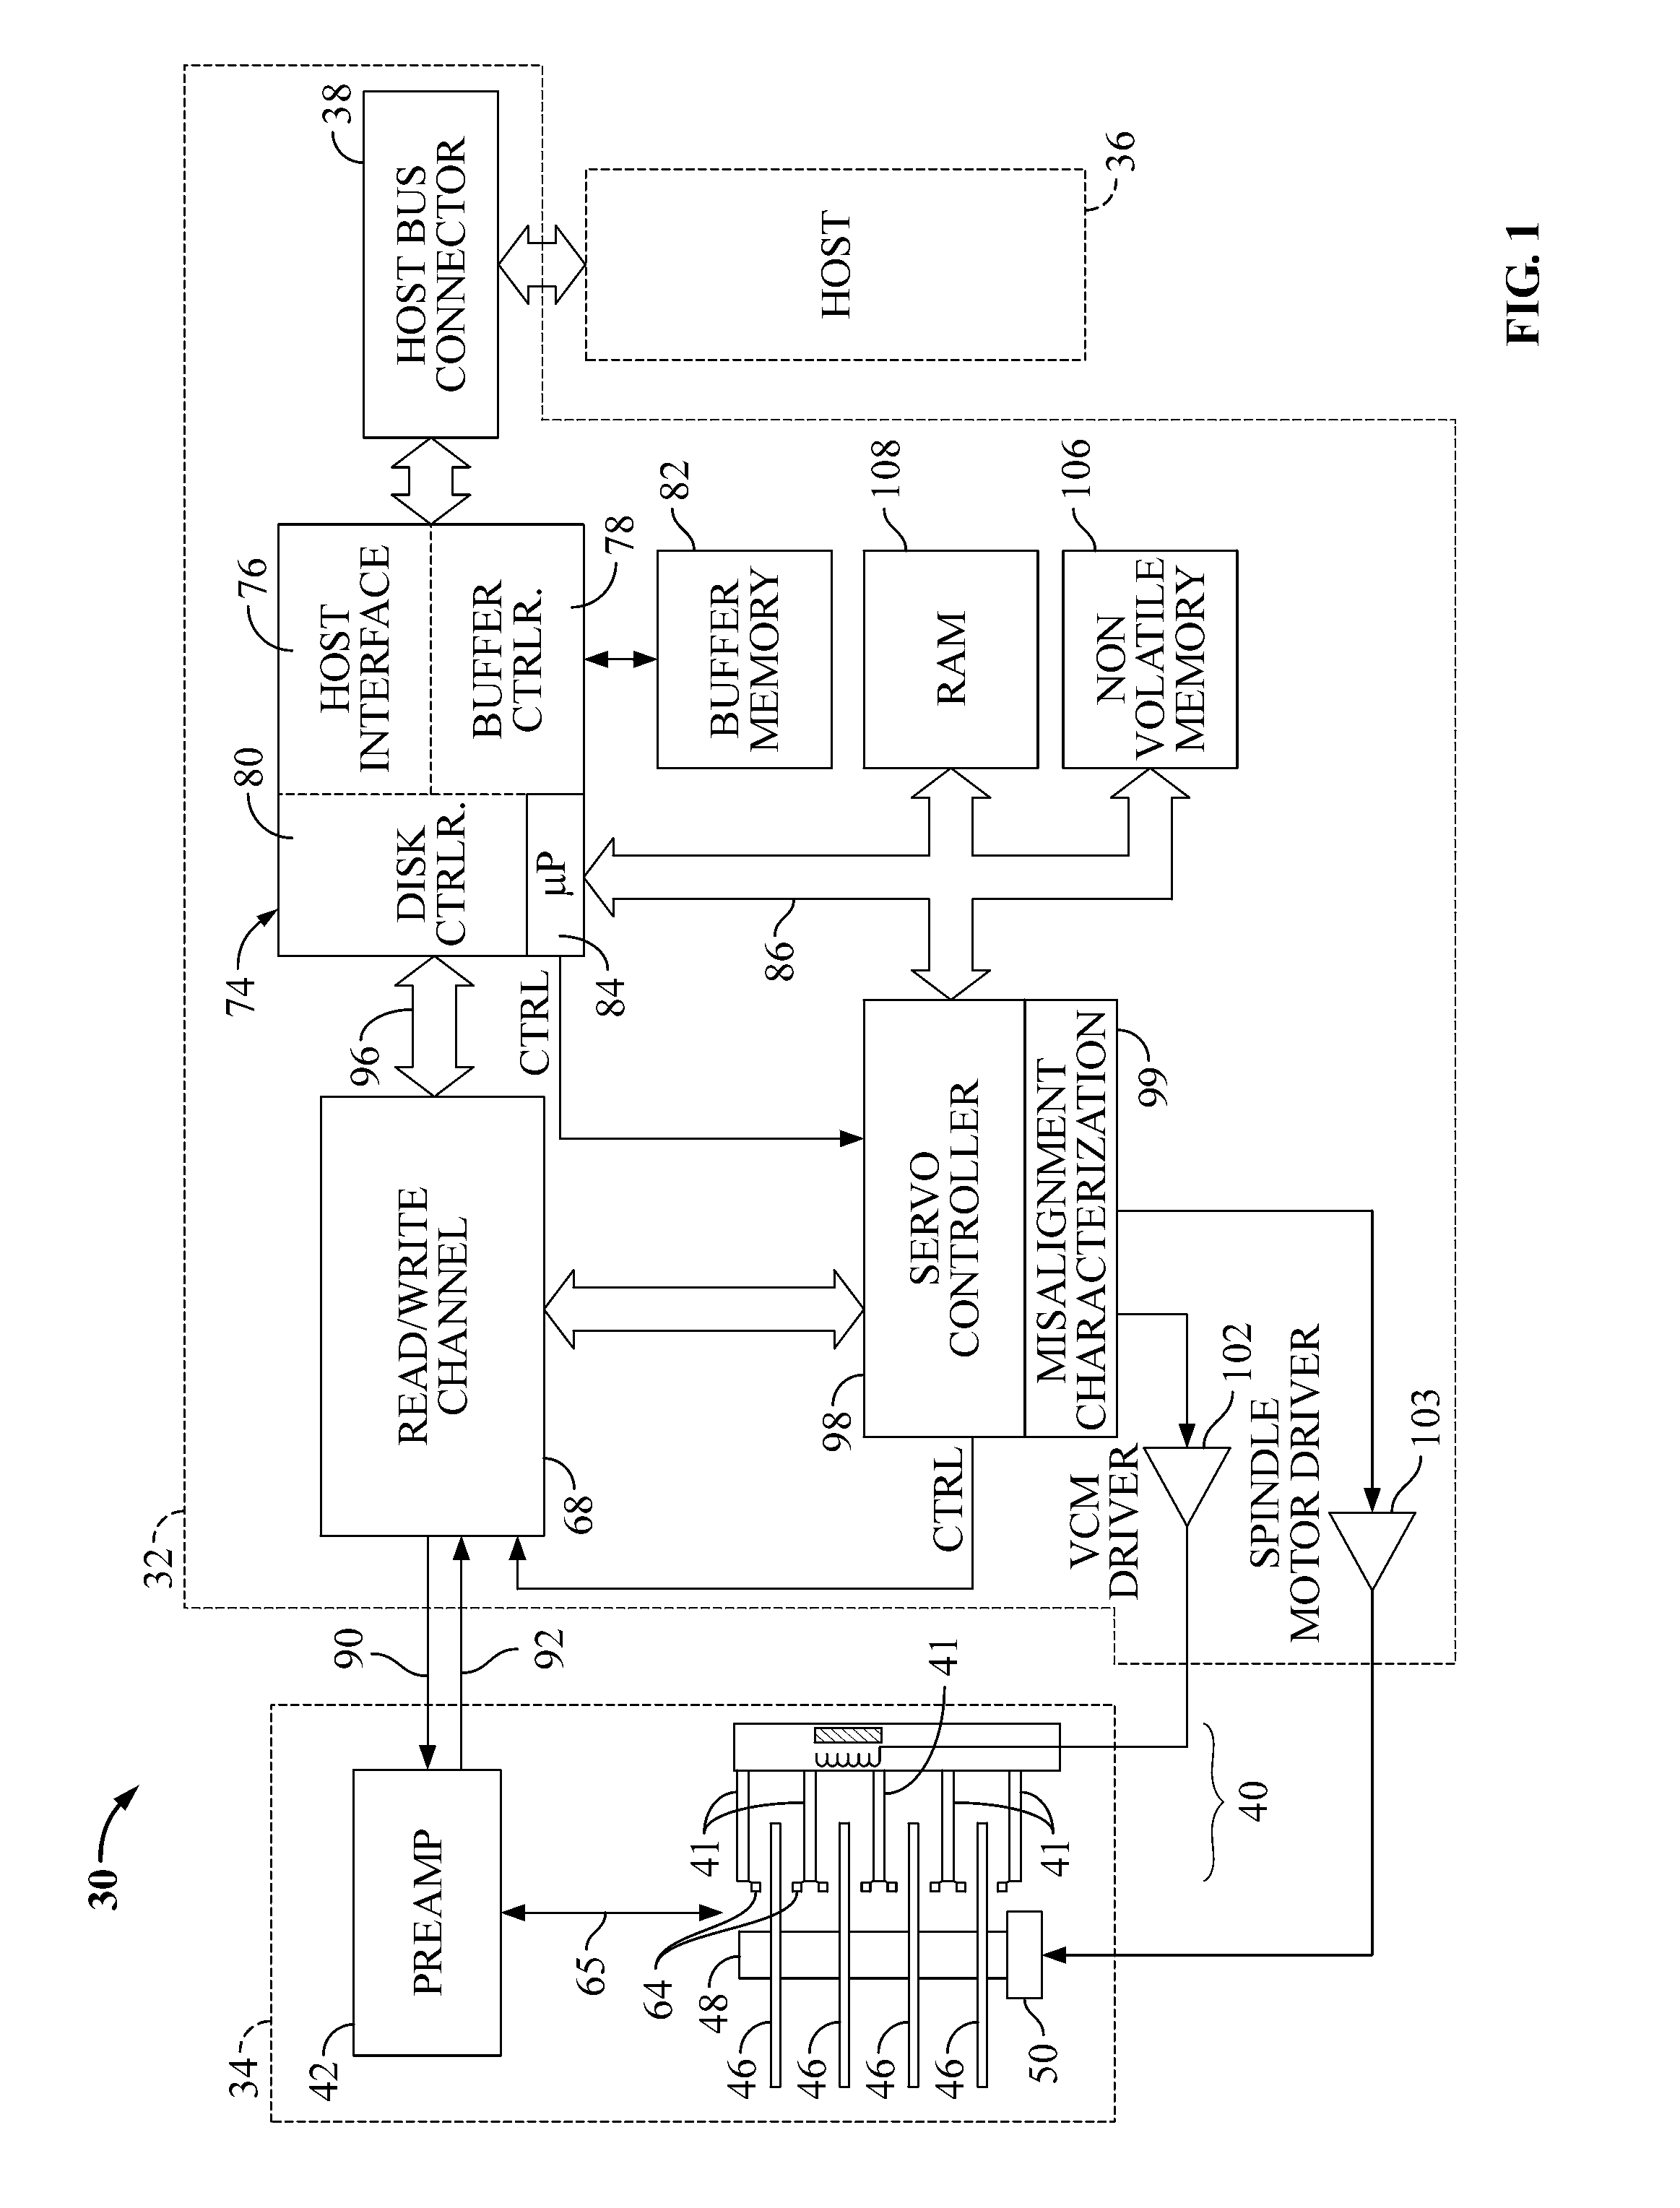 Disk drive to characterize misaligned servo wedges